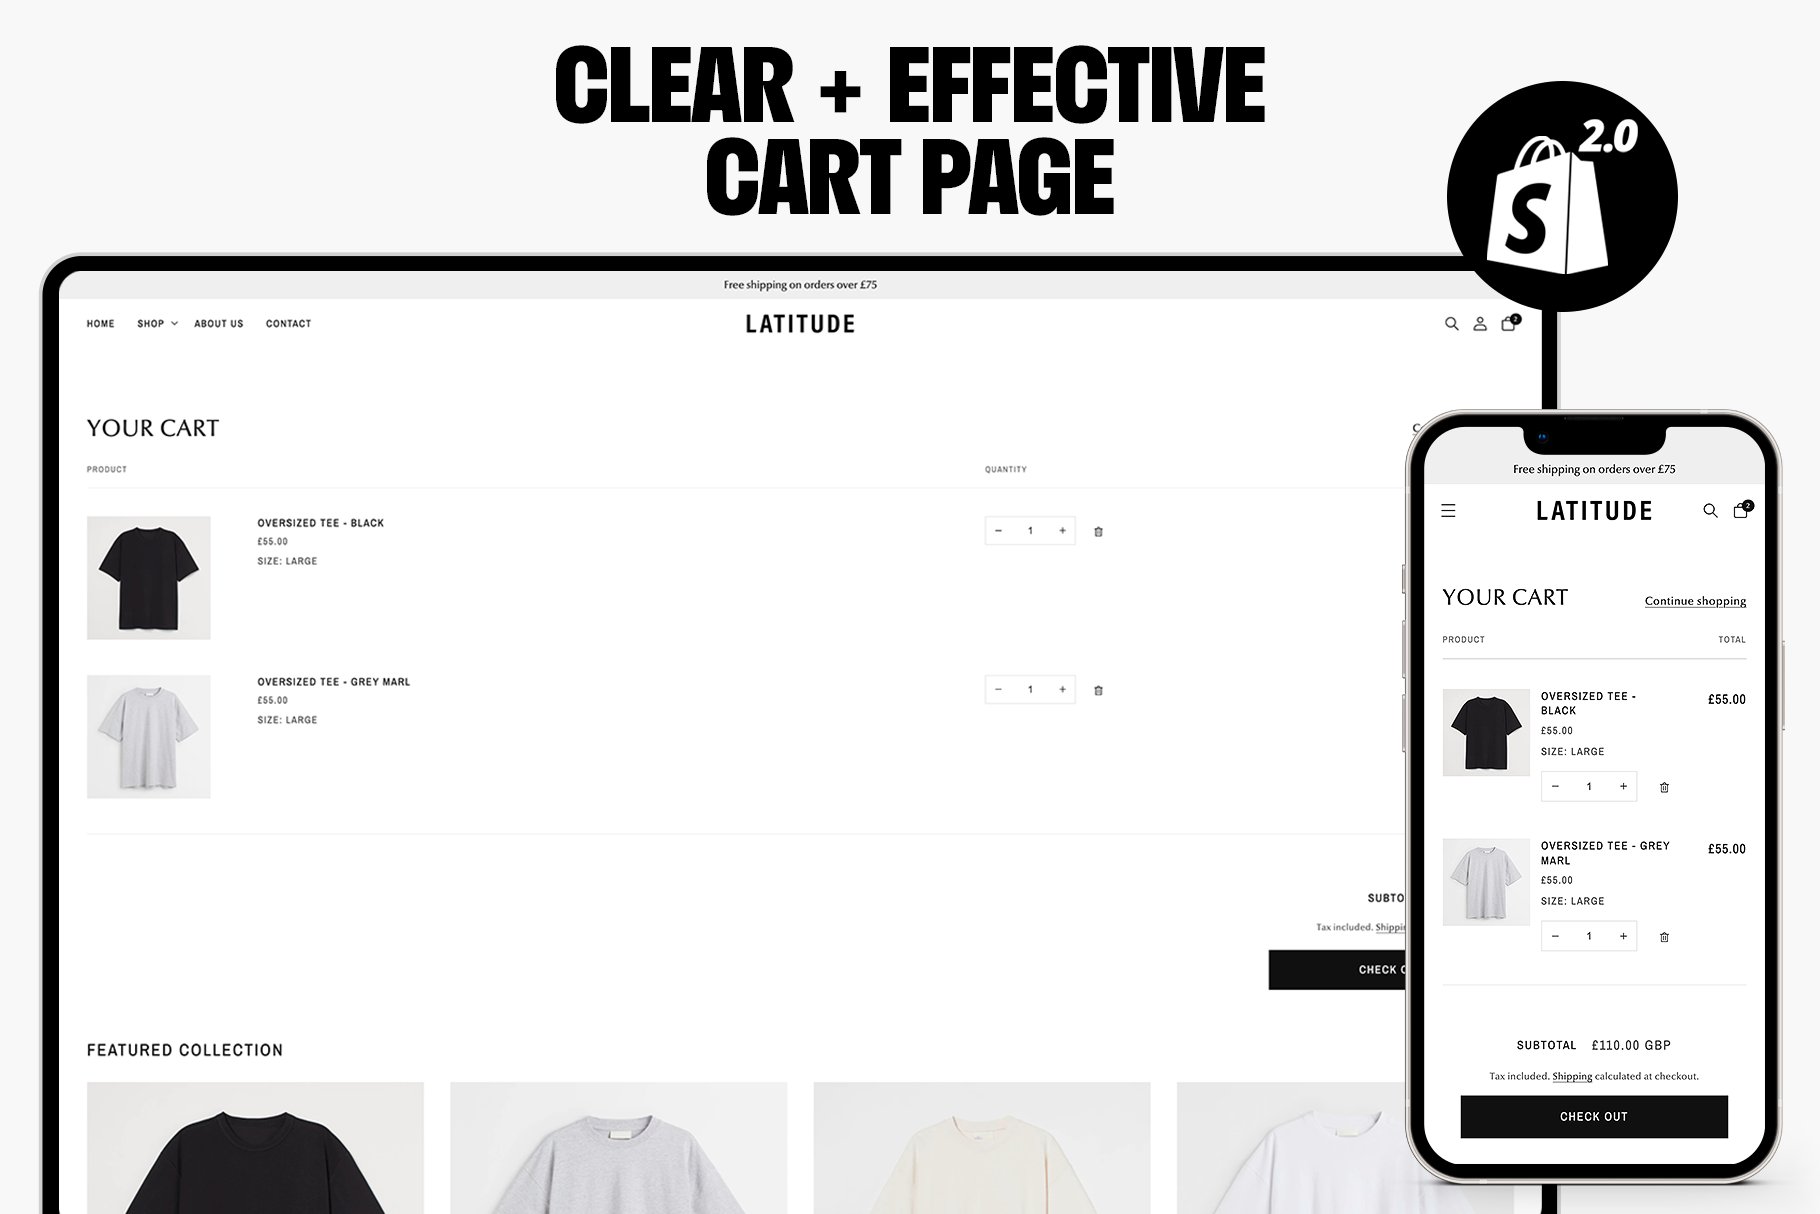 There is such a clear and effective cart page.